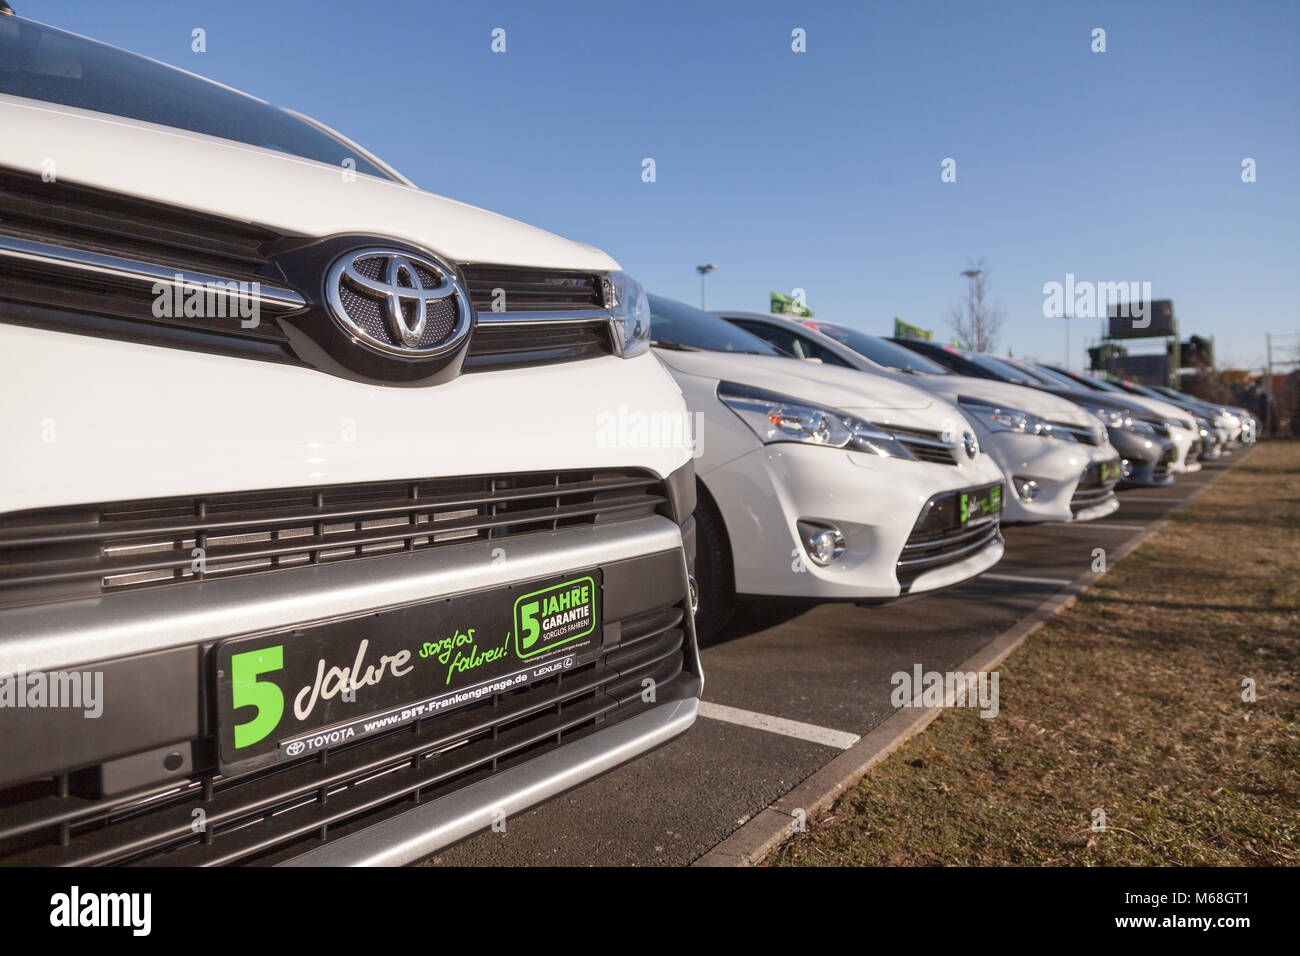 FUERTH / GERMANY - FEBRUARY 25, 2018: Toyota logo on a car. Toyota Motor Corporation is a Japanese multinational automotive manufacturer headquartered Stock Photo